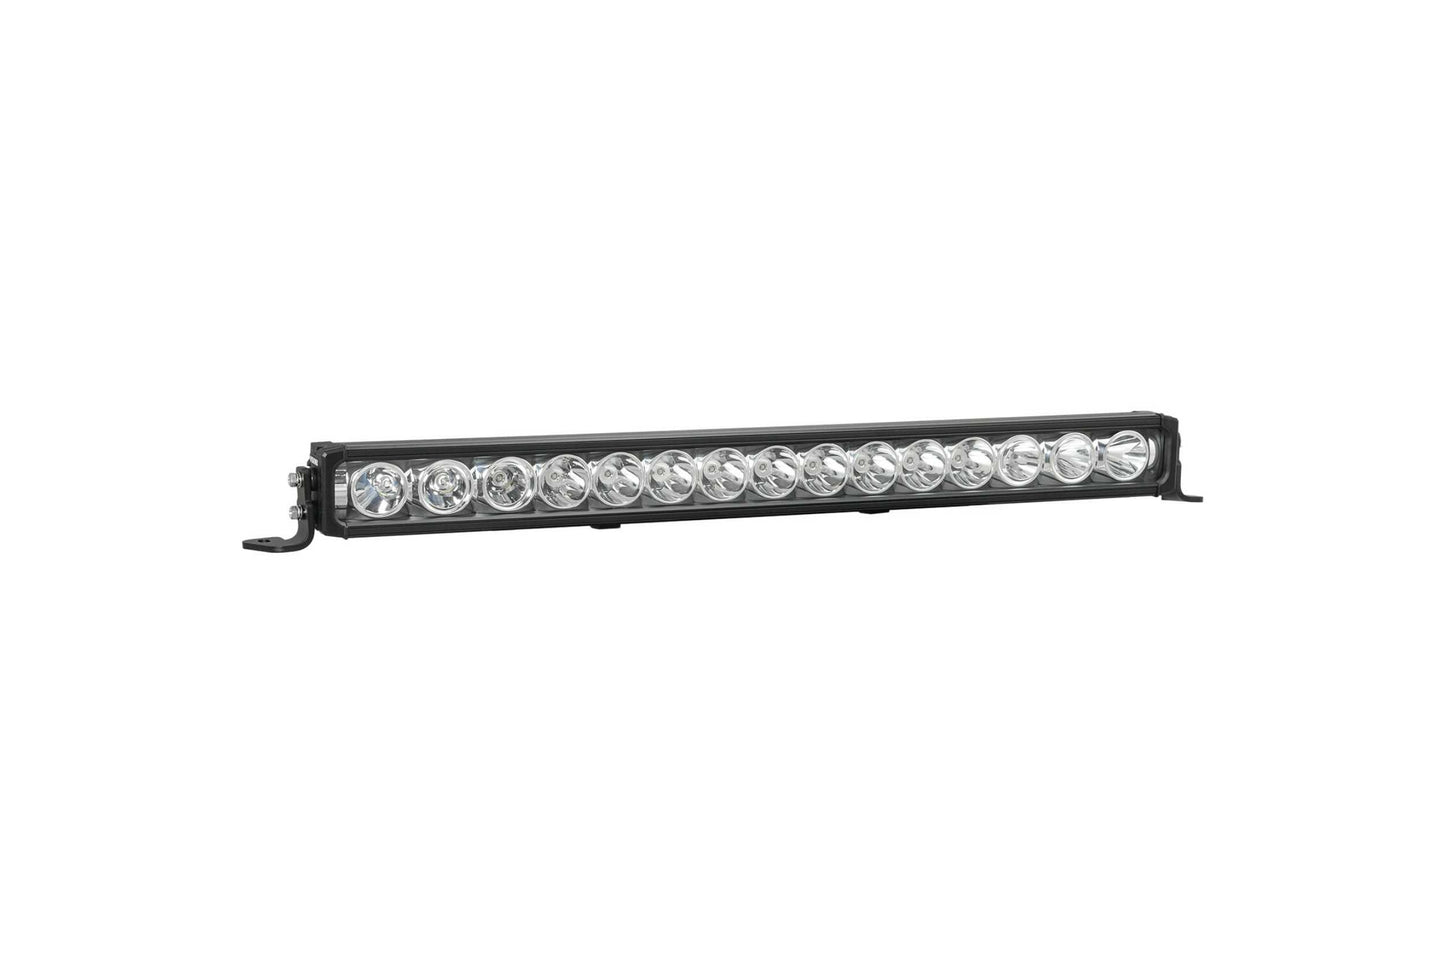 Vision X Light Bar: 25in (12-LED / XPR / Mixed Beam)